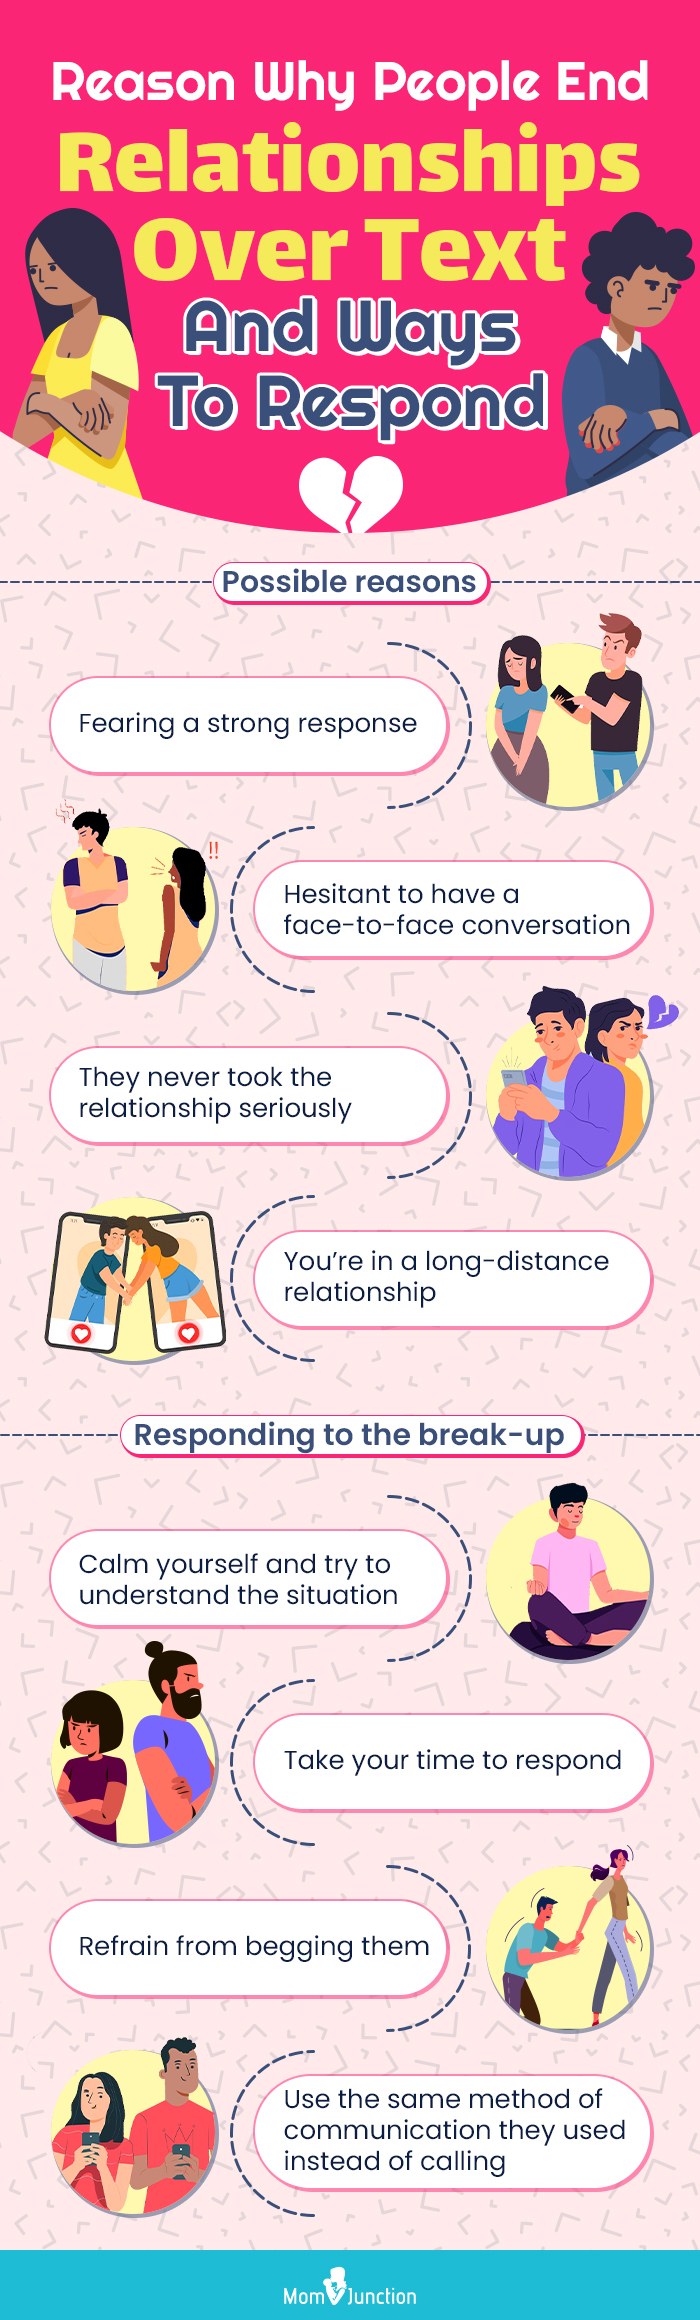 reason why people end relationships over text and ways to respond(infographic)